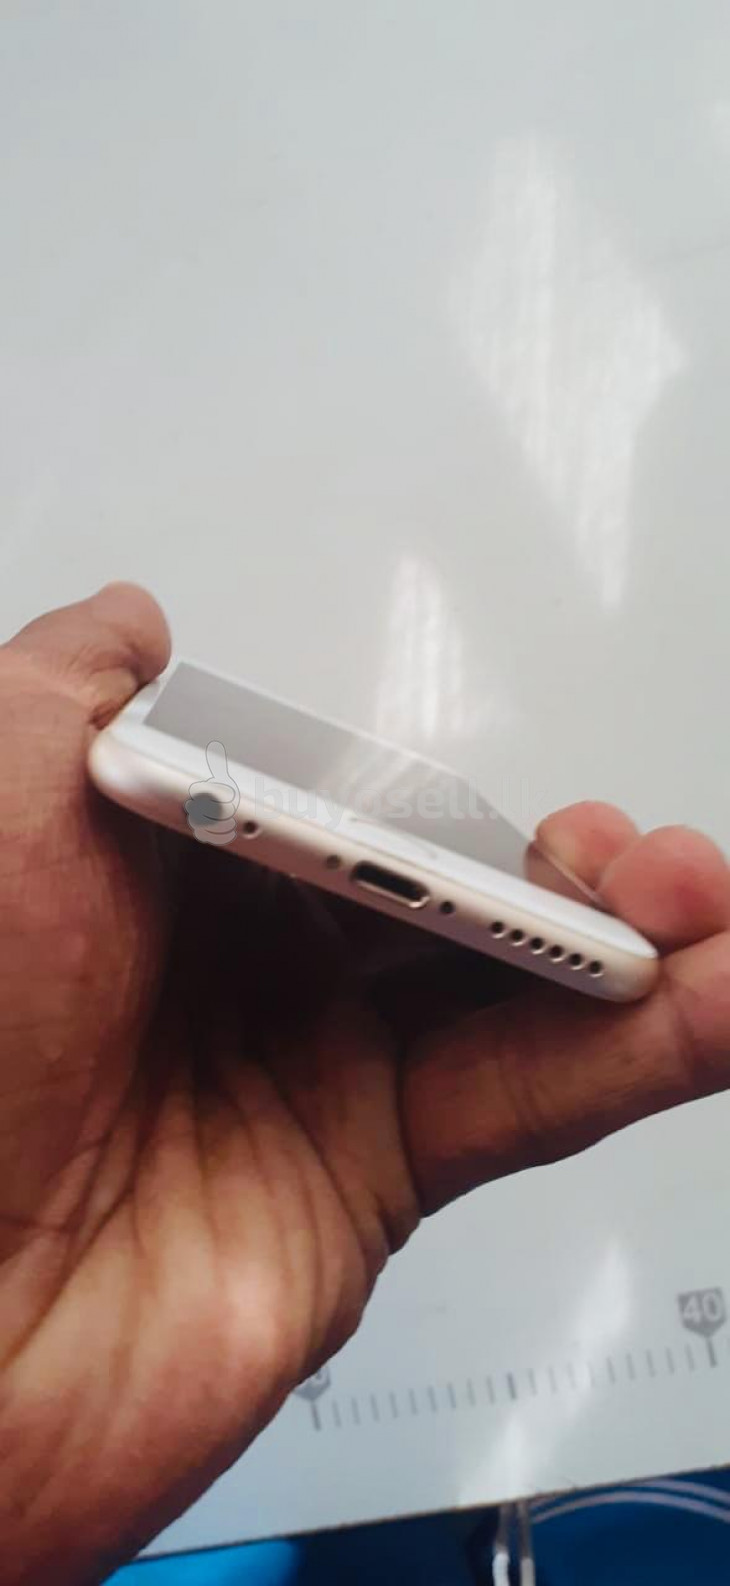 Apple iPhone 6 128GB (Used) for sale in Gampaha